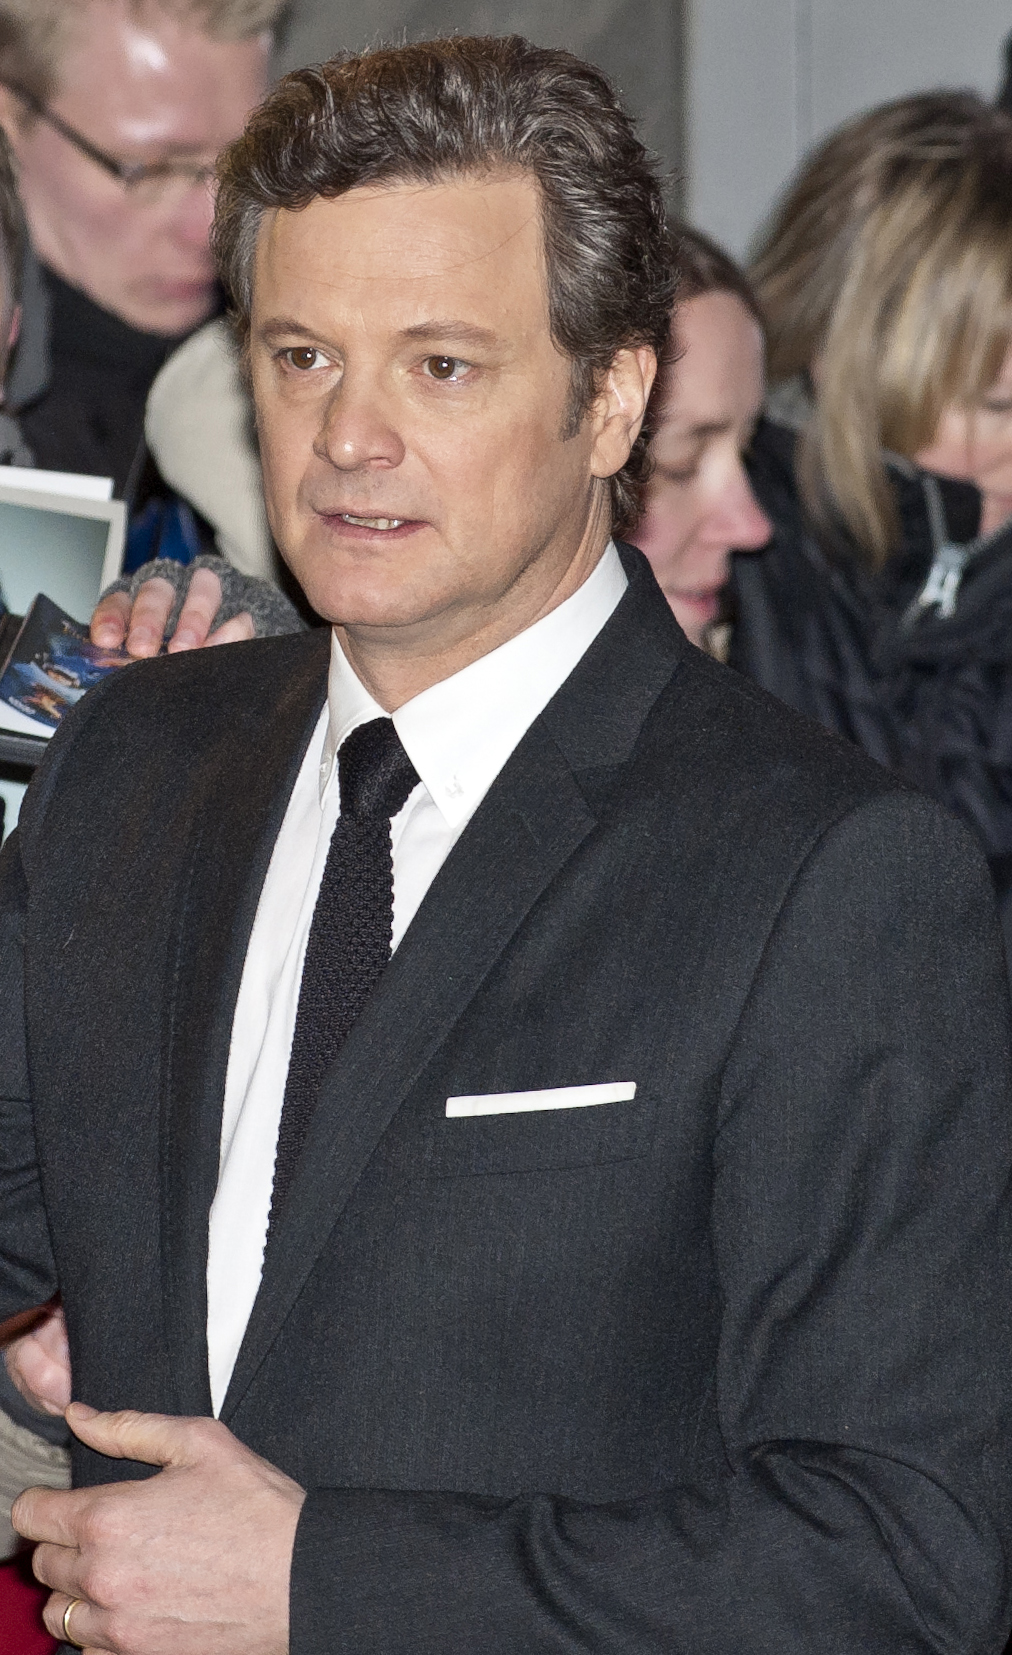 Colin Firth at the press conference of "The King's Speech".